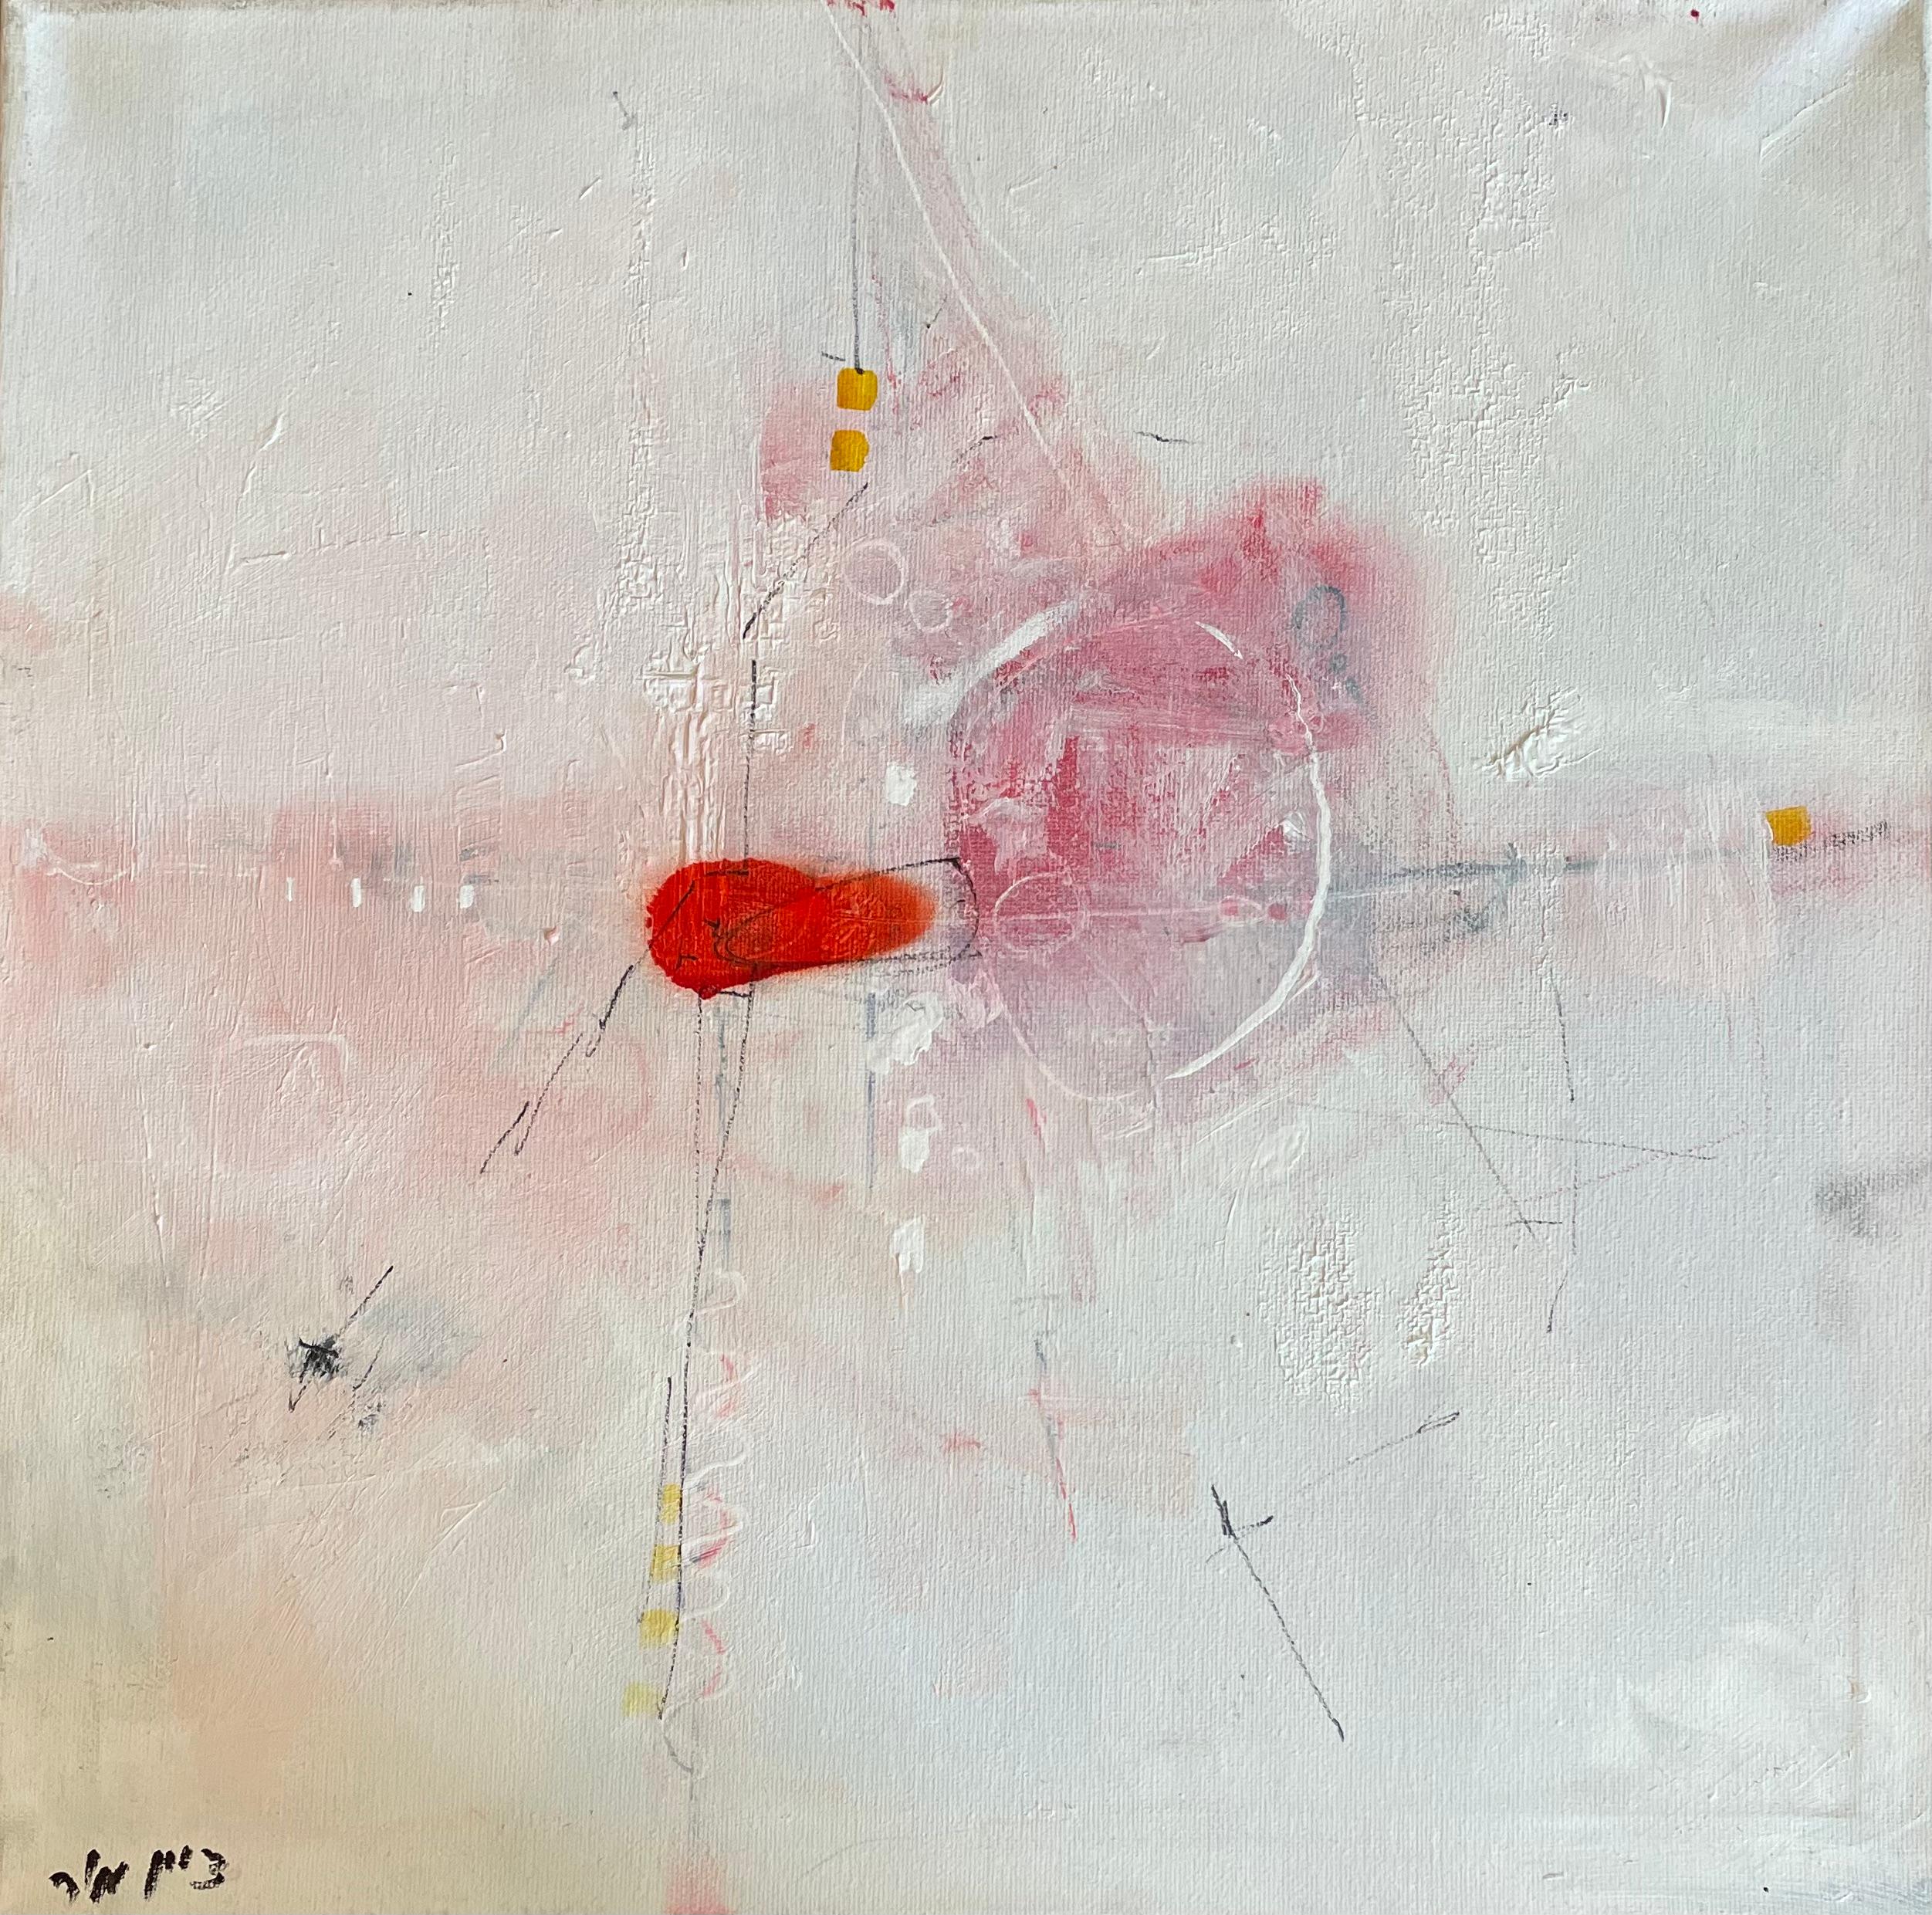 Zion Mor Abstract Painting - "Just Love" White & Red Minimalist Contemporary Abstract Line-work Landscape